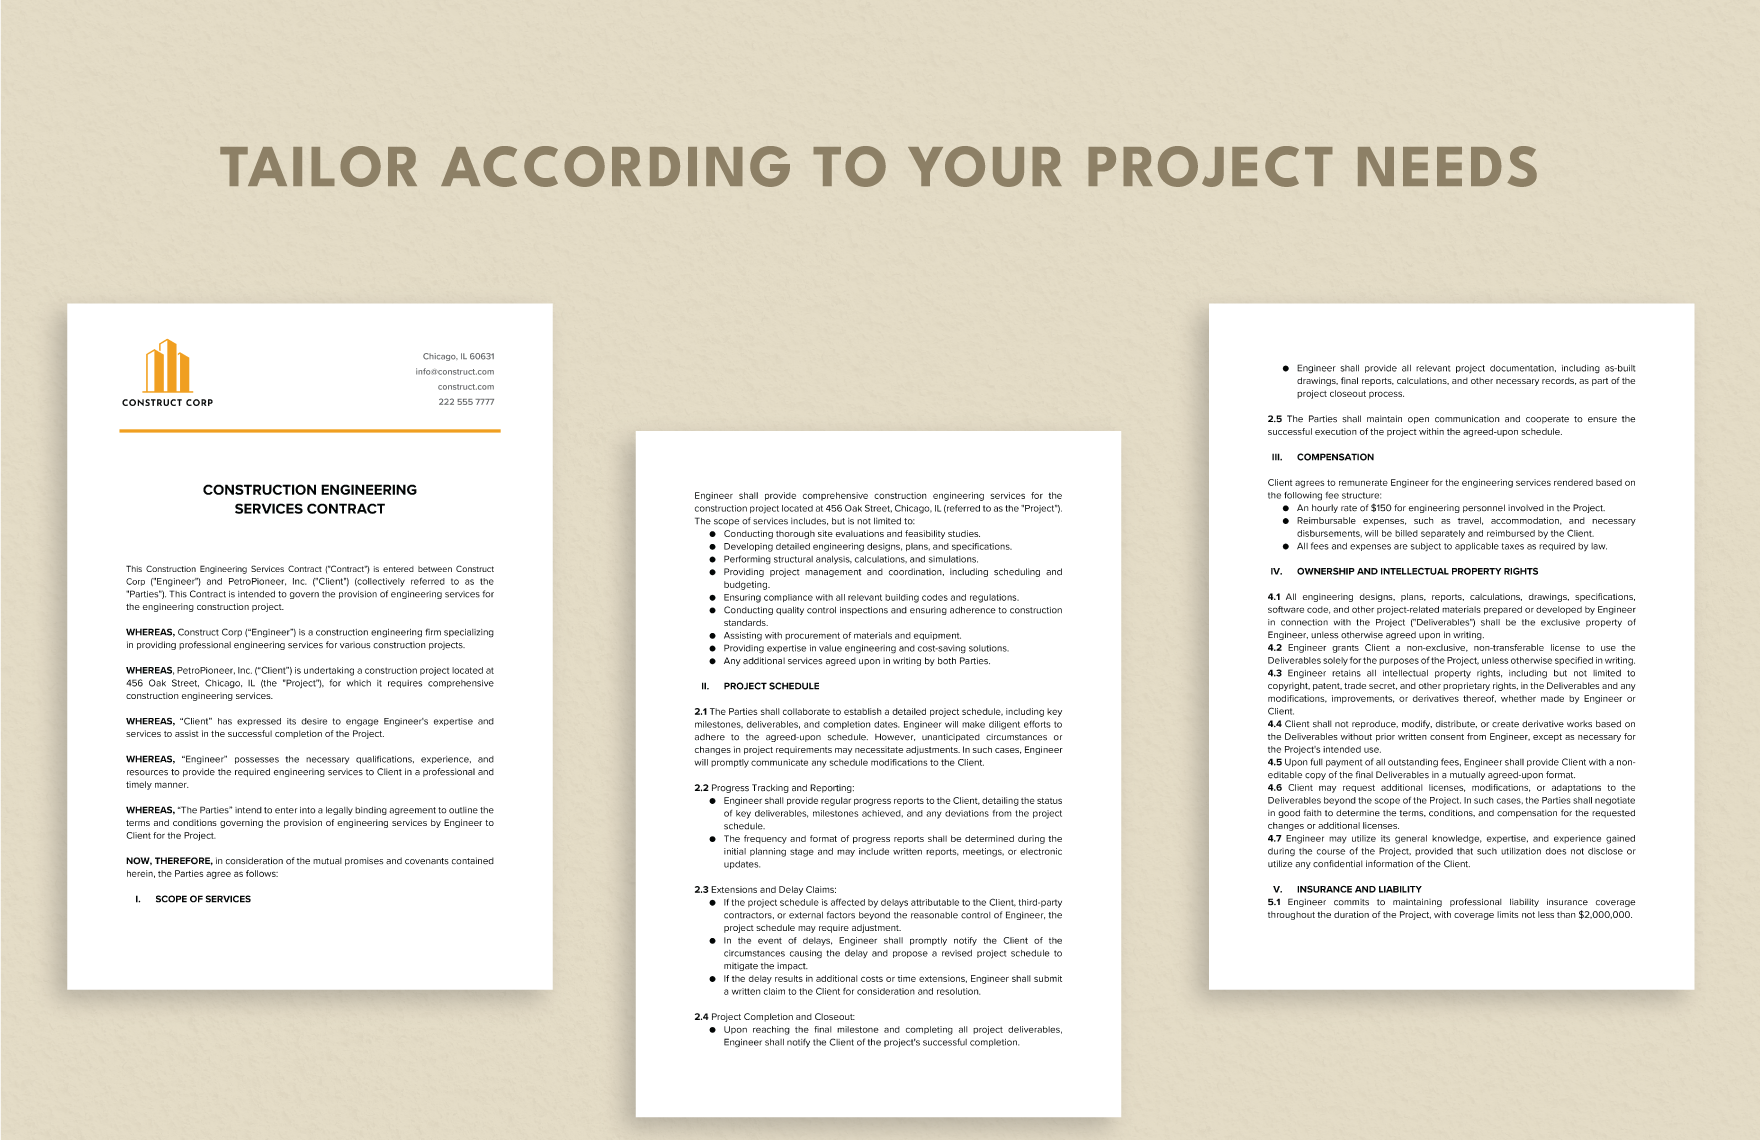 Construction Engineering Services Contract Template